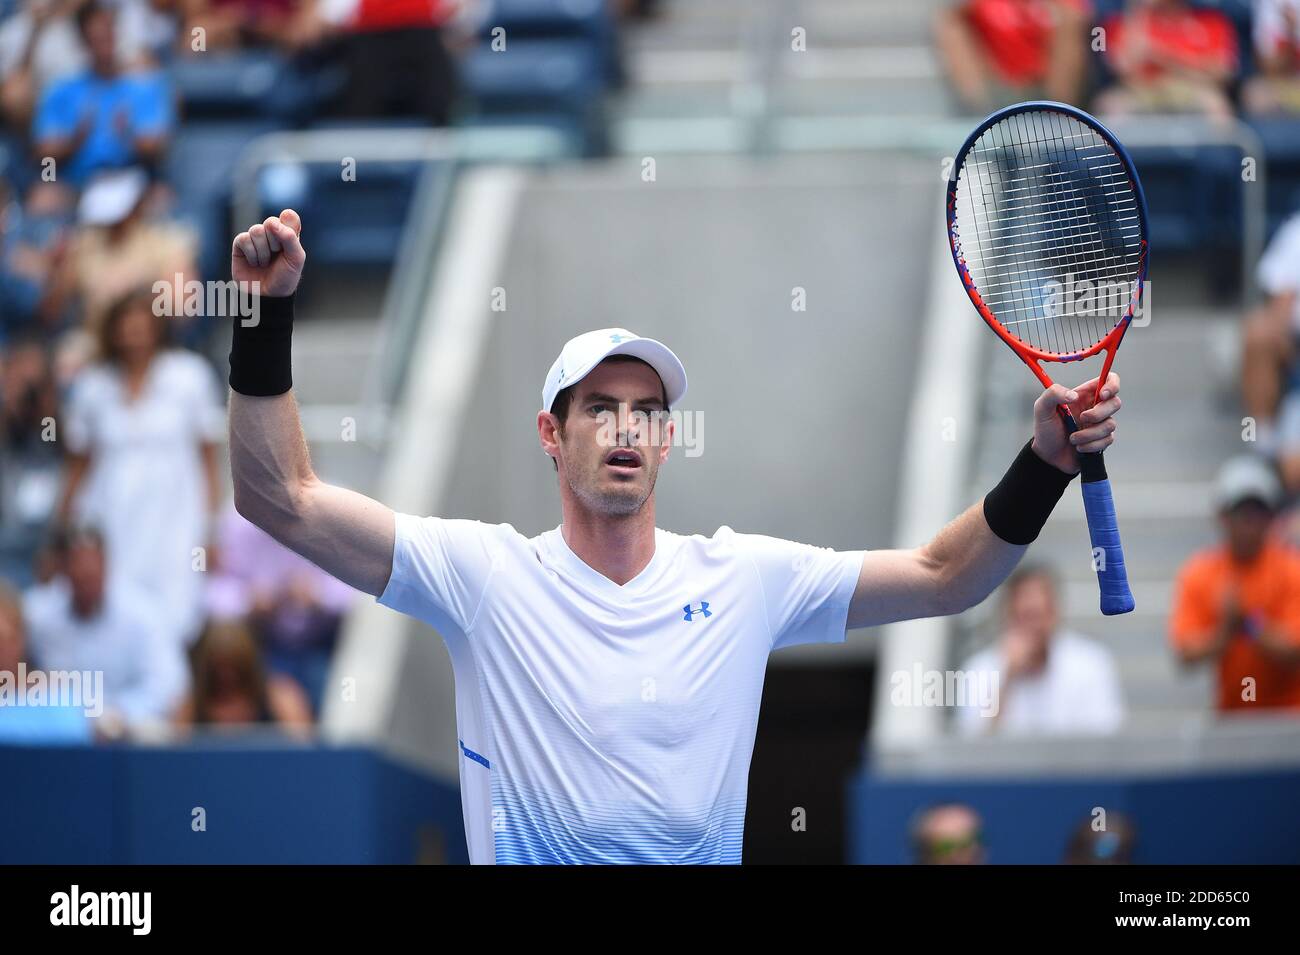 File photo - Murray (GBR) during first round at the 2018 US Open at Billie Jean National Tennis Center in New York City, NY, USA on August 27, 2018. Andy